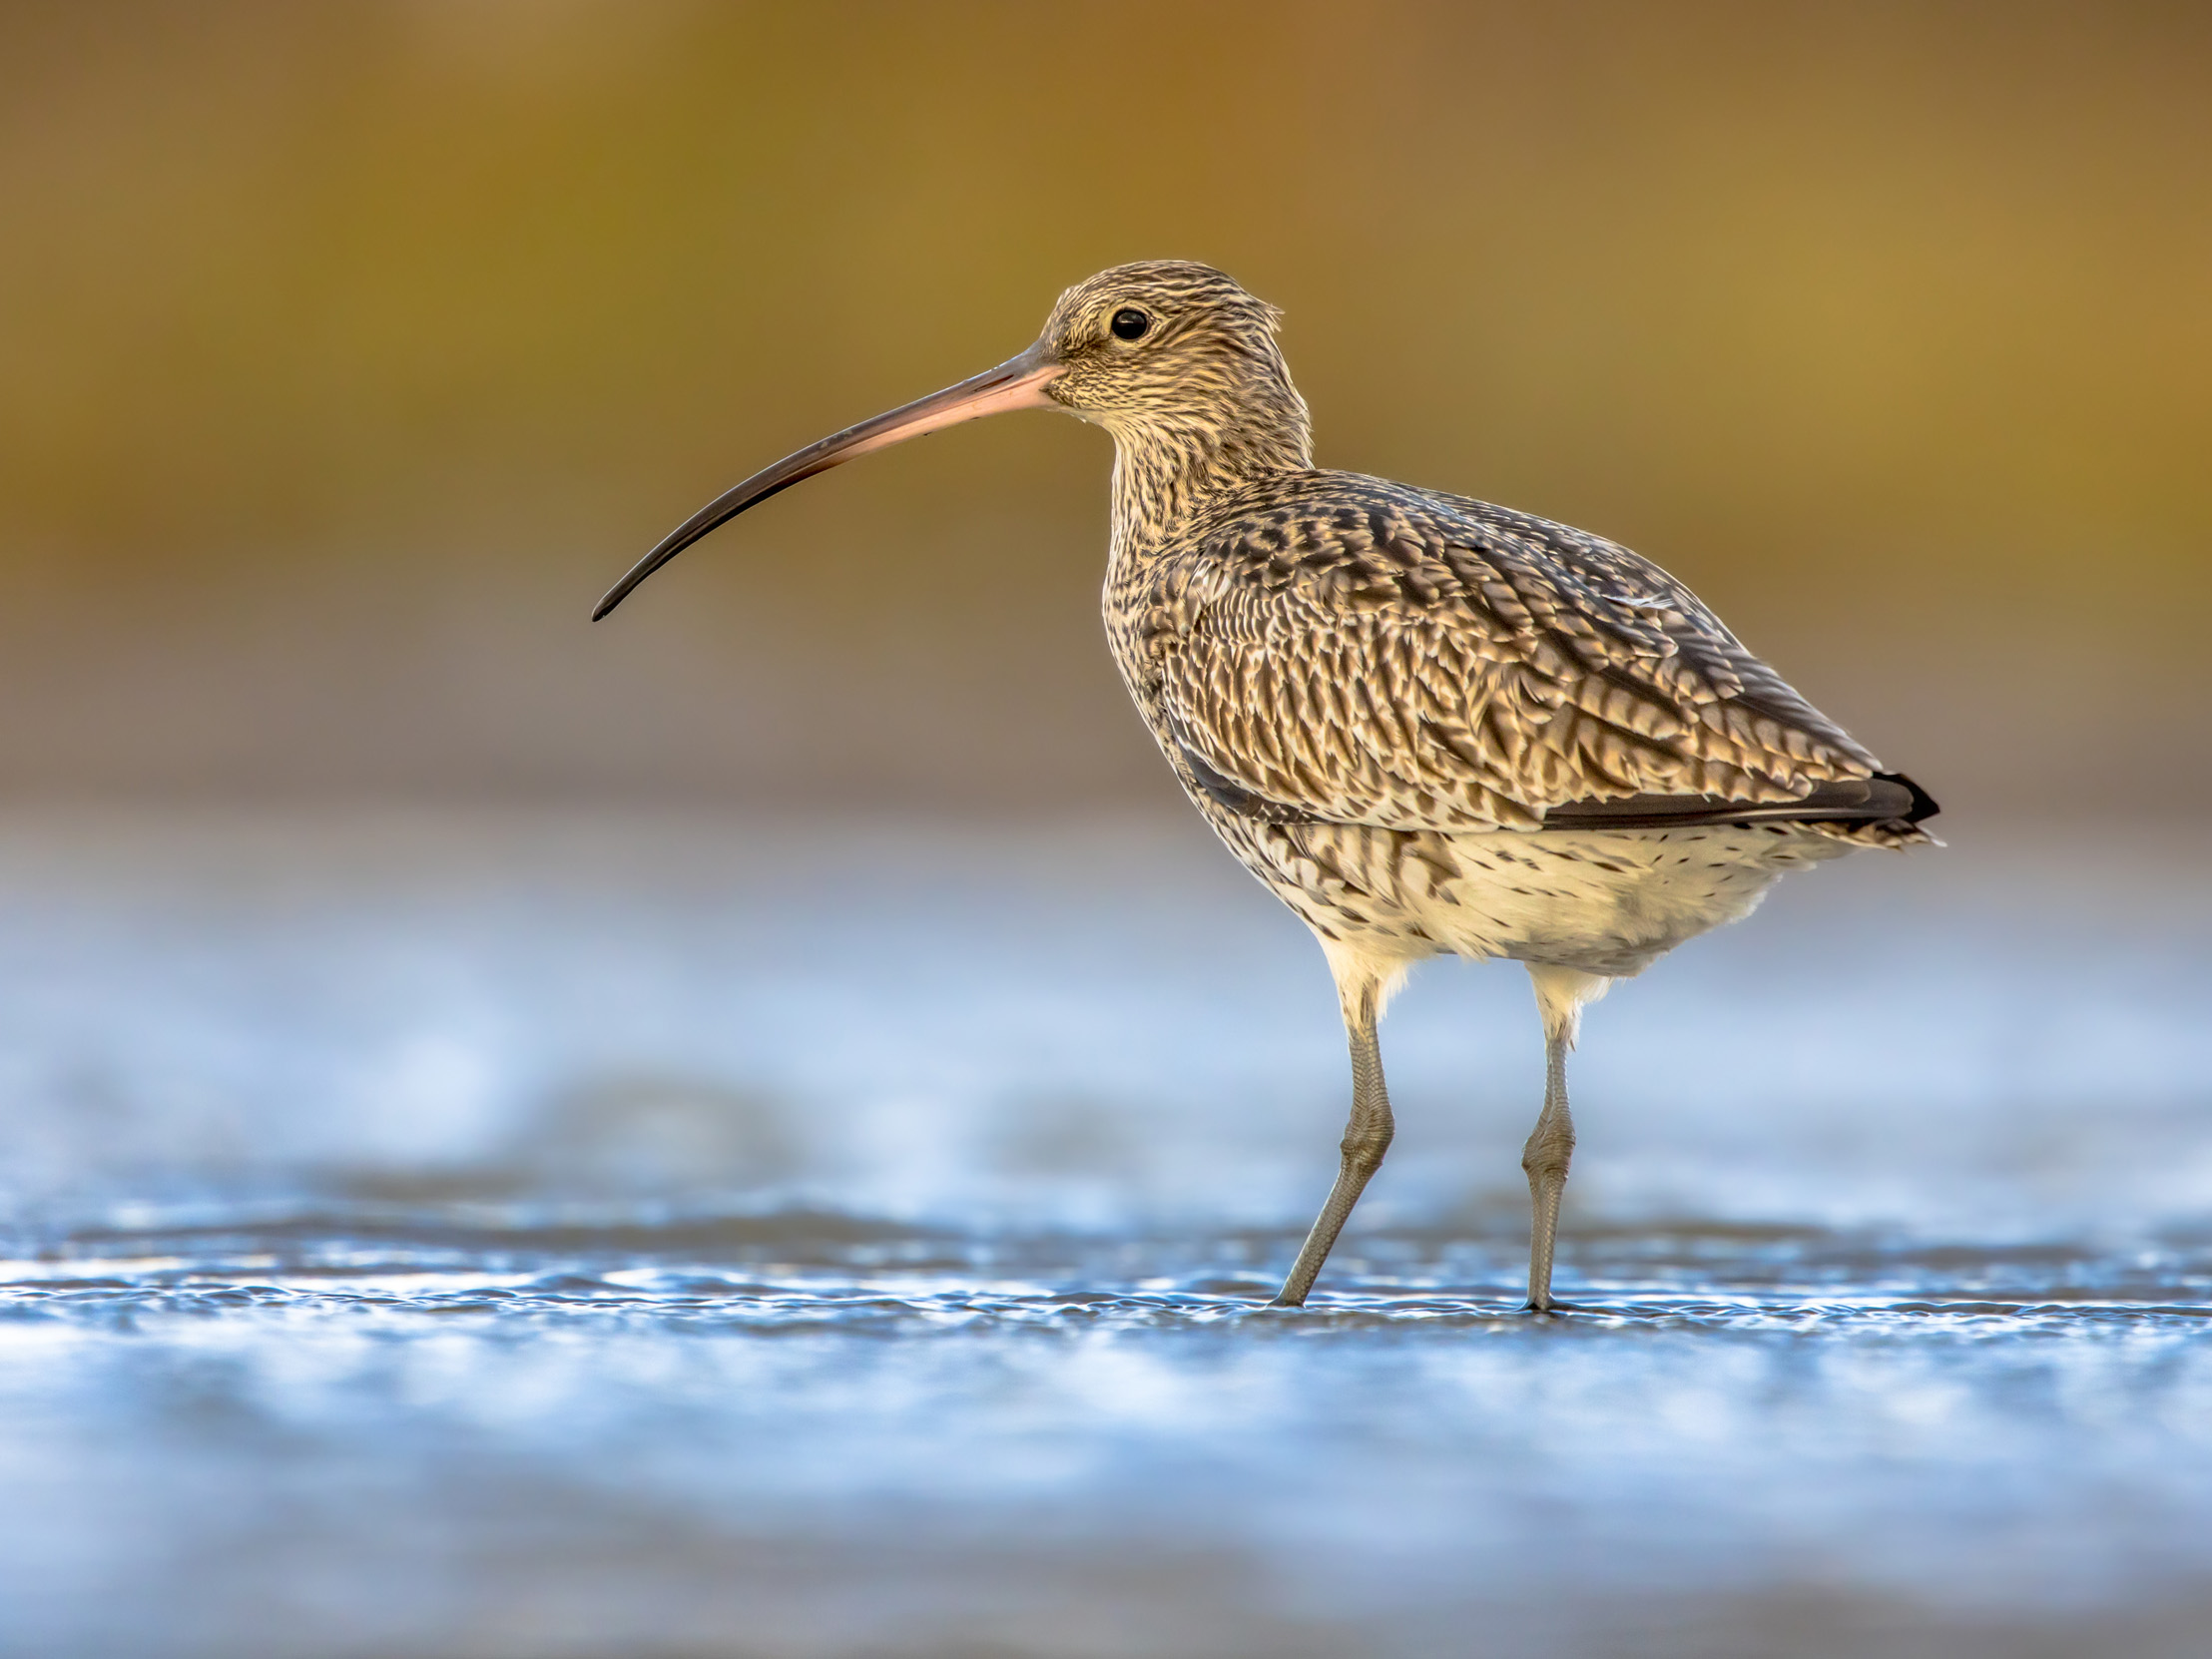 Lone Curlew stood in shallow water, side on